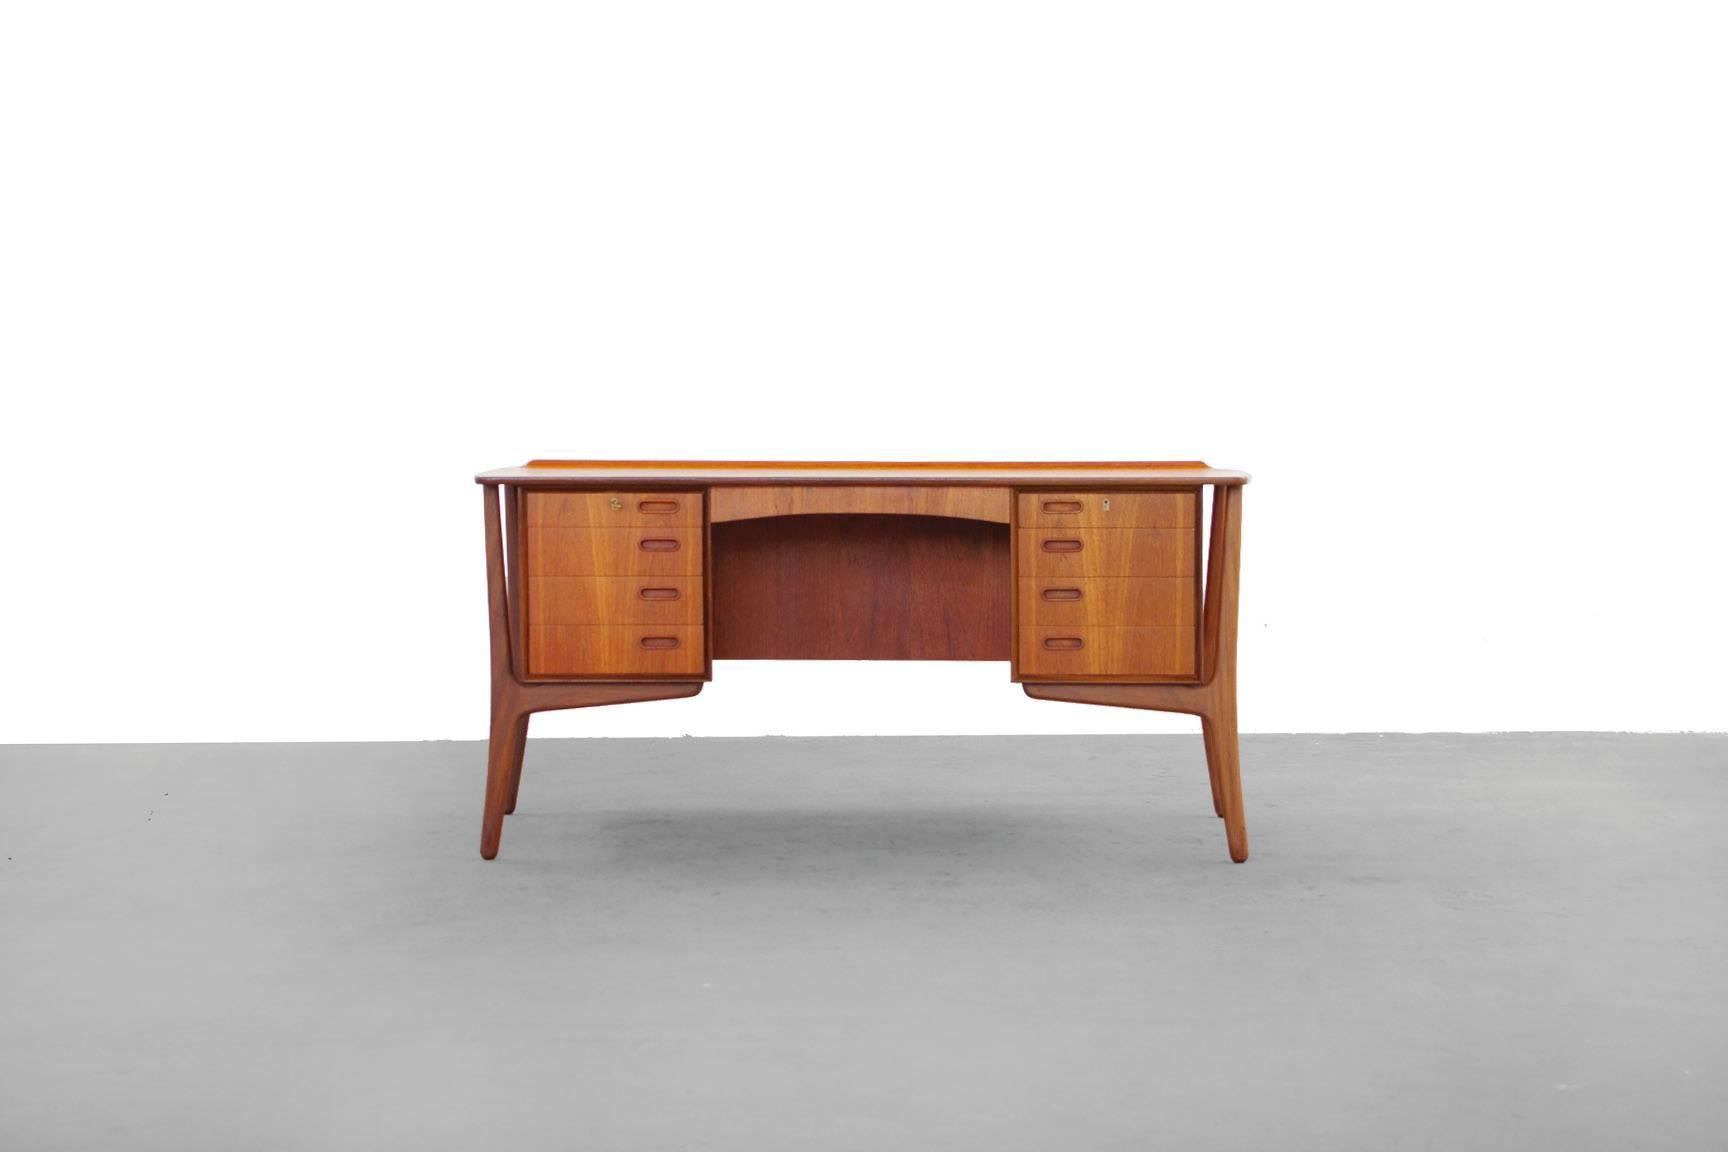 Freestanding teak desk by Svend Aage Madsen, Denmark. Beautiful curved plate with fillet edge, front with six drawers, backside with pocket, curved outwards on floating legs. Good condition, one plate behind is missing.